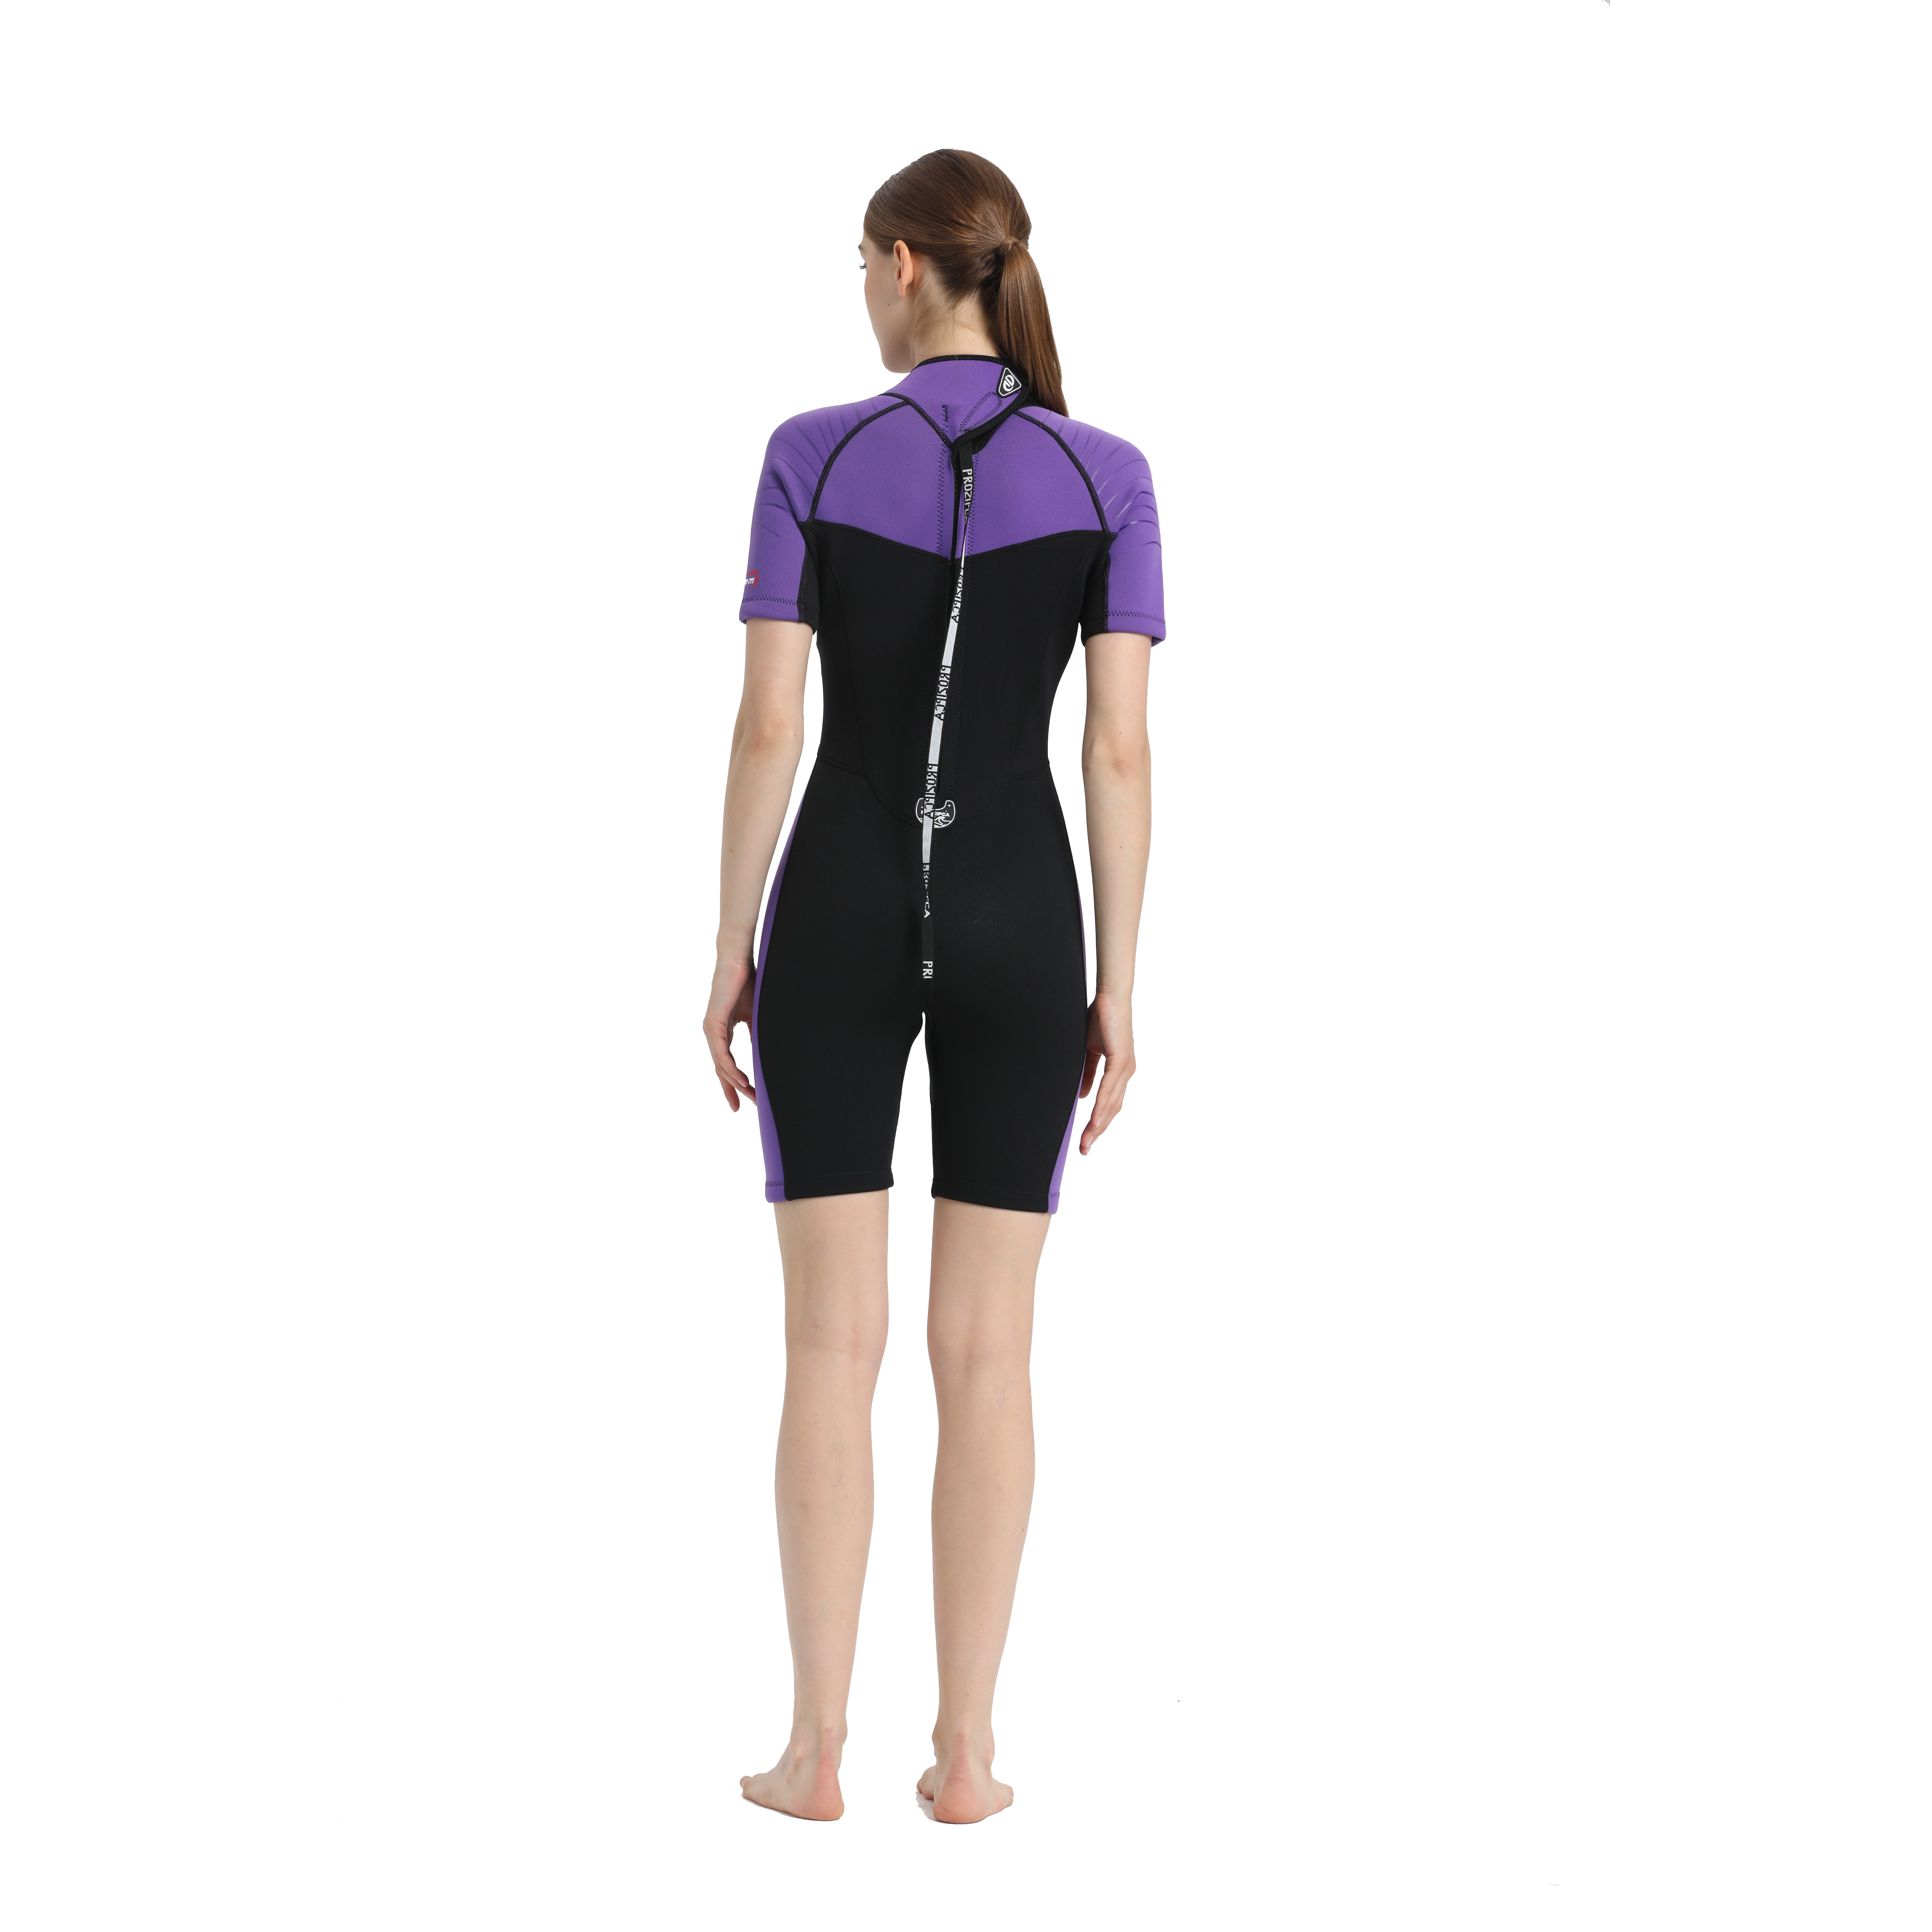 Wholesale Backzipper Breathable Diving Suit Tight One Piece 3Mm Shorty Women Surfing Wetsuits Neoprene